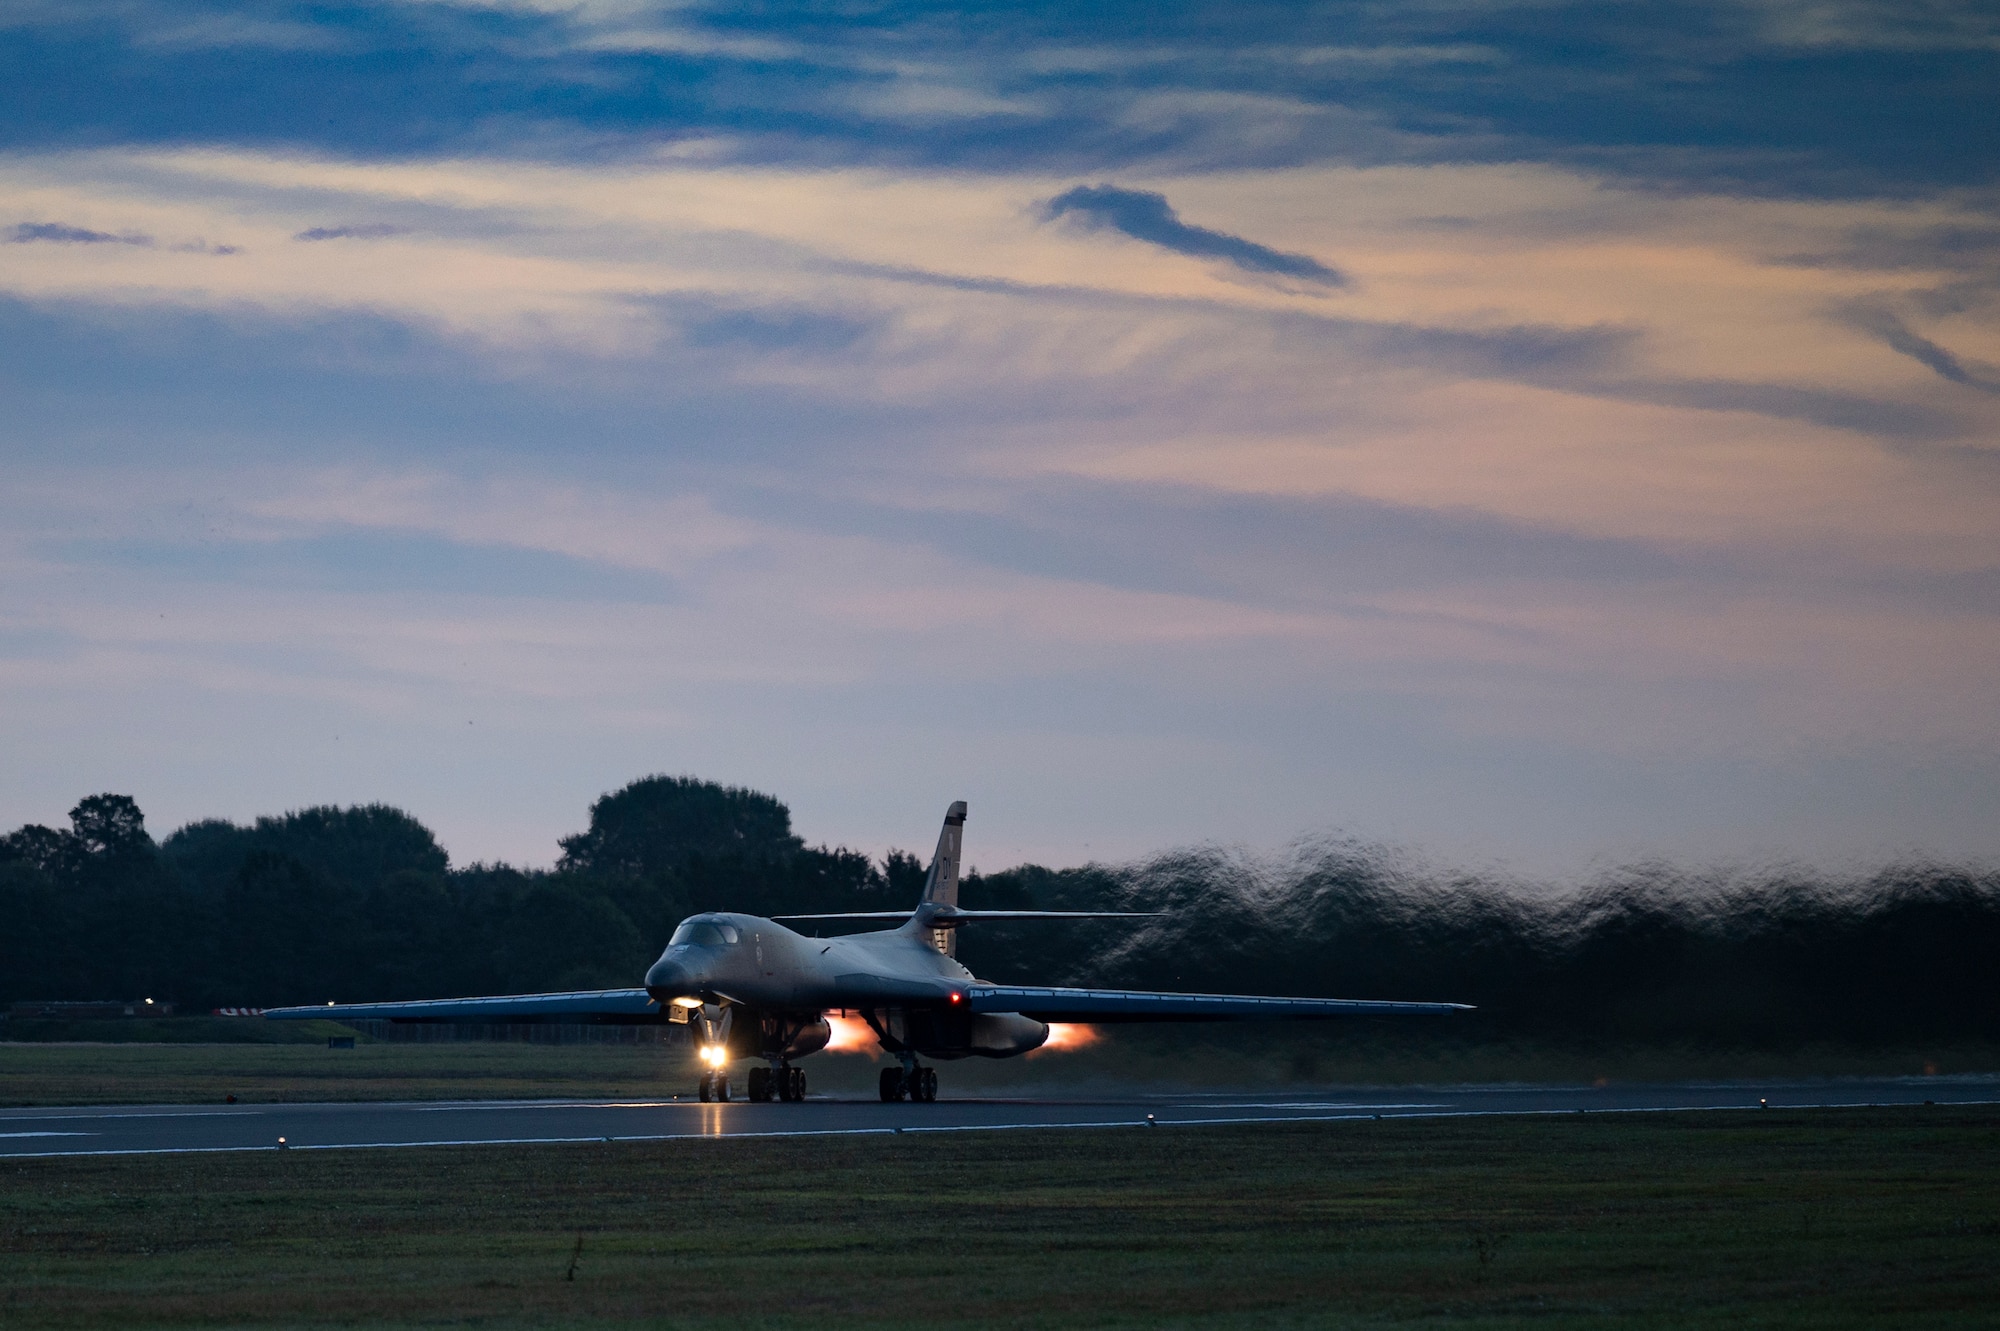 A B-1B Lancer assigned to the 9th Expeditionary Bomb Squadron takes off at RAF Fairford, United Kingdom, to conduct a Bomber Task Force Europe mission over the Baltic Sea region, Oct. 11, 2021. The mission focused on enhancing readiness and interoperability with Allied Joint Terminal Attack Controllers from Lithuania. (U.S. Air Force photo by Senior Airman Colin Hollowell)